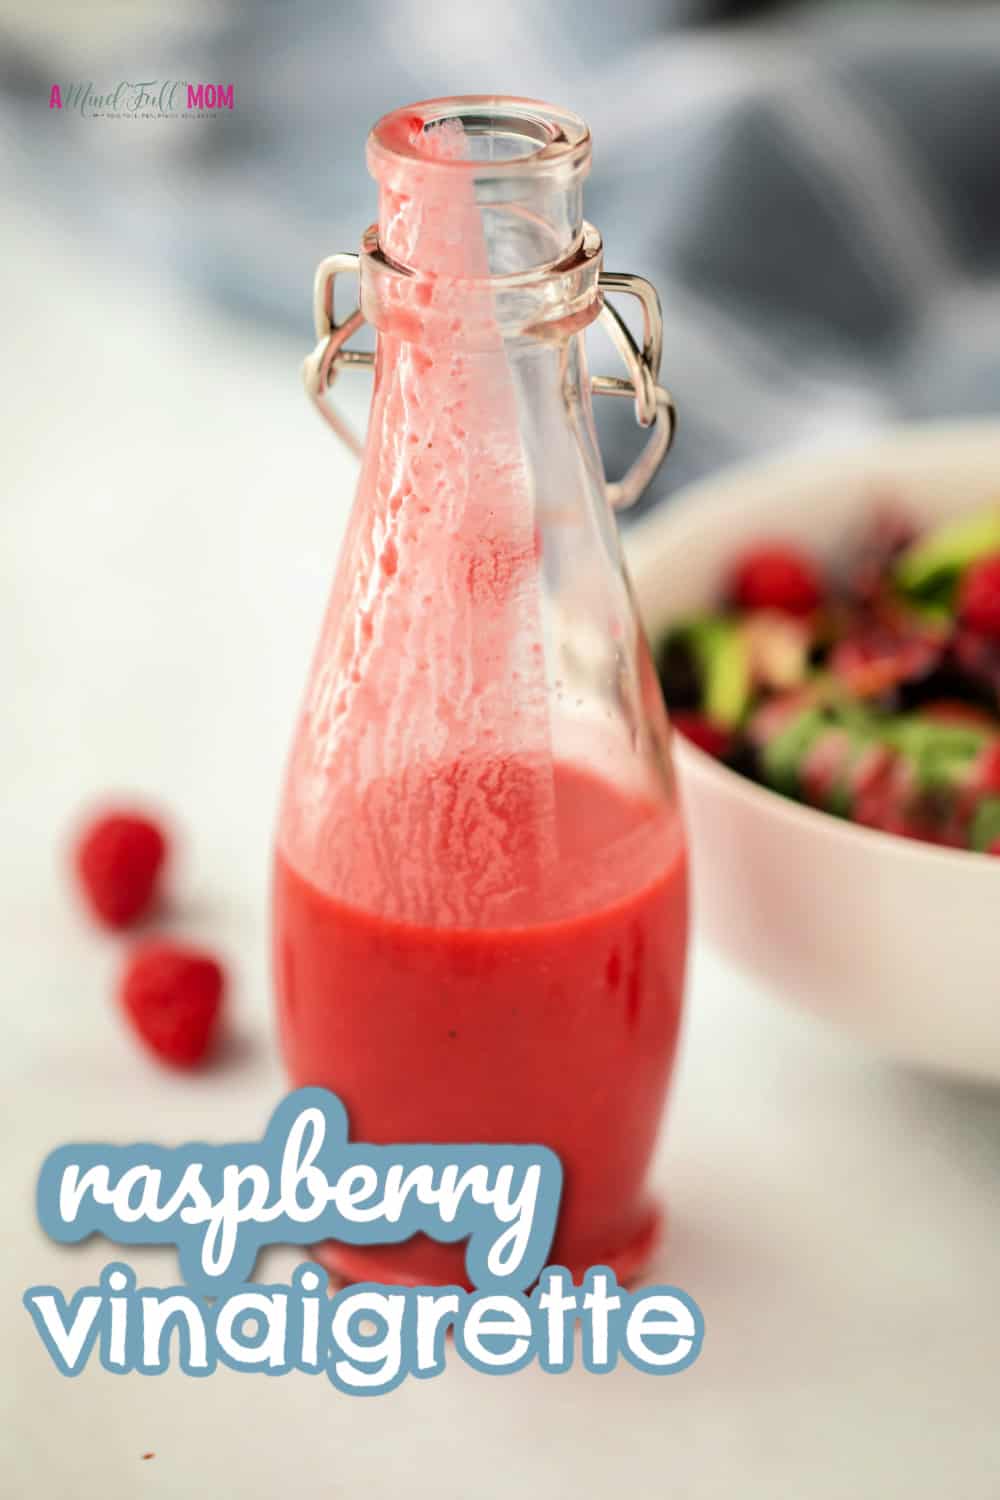 Dress up your salad with an easy Homemade Raspberry Dressing! This simple salad dressing made with fresh raspberries is sweet and tangy and makes simple salads POP with flavor!